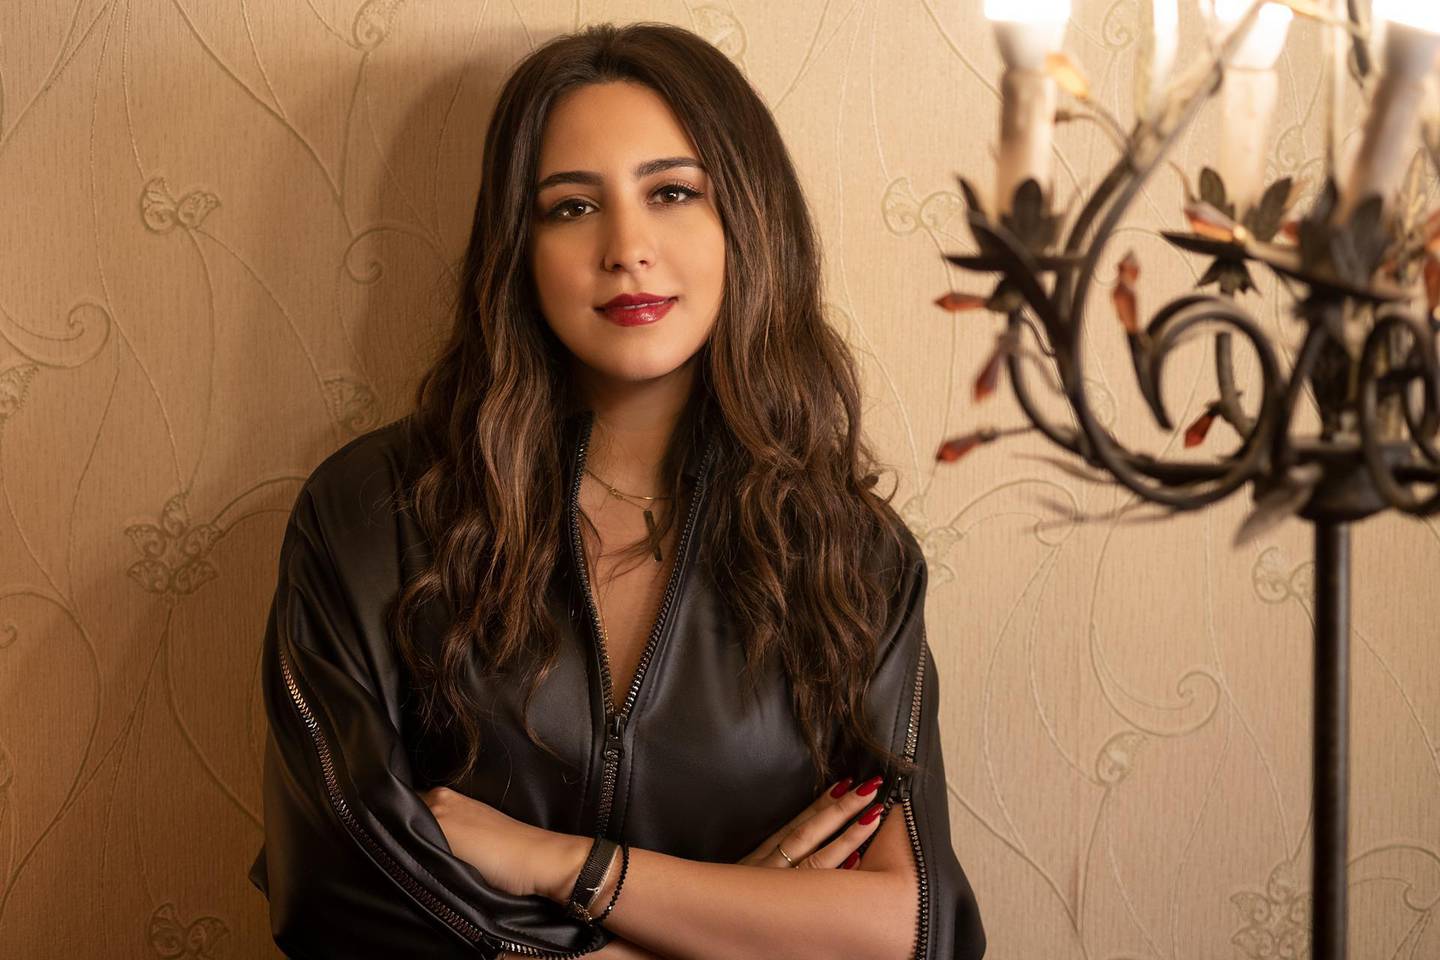 Mayssa Karaa, the artistic director of Berklee Abu Dhabi, is an alumni of the Berklee College of Music. The Lebanese-American singer-songwriter was nominated for a Grammy in 2015 for her Arabic rendition of the 60s Jefferson Airplane hit White Rabbit. DCT